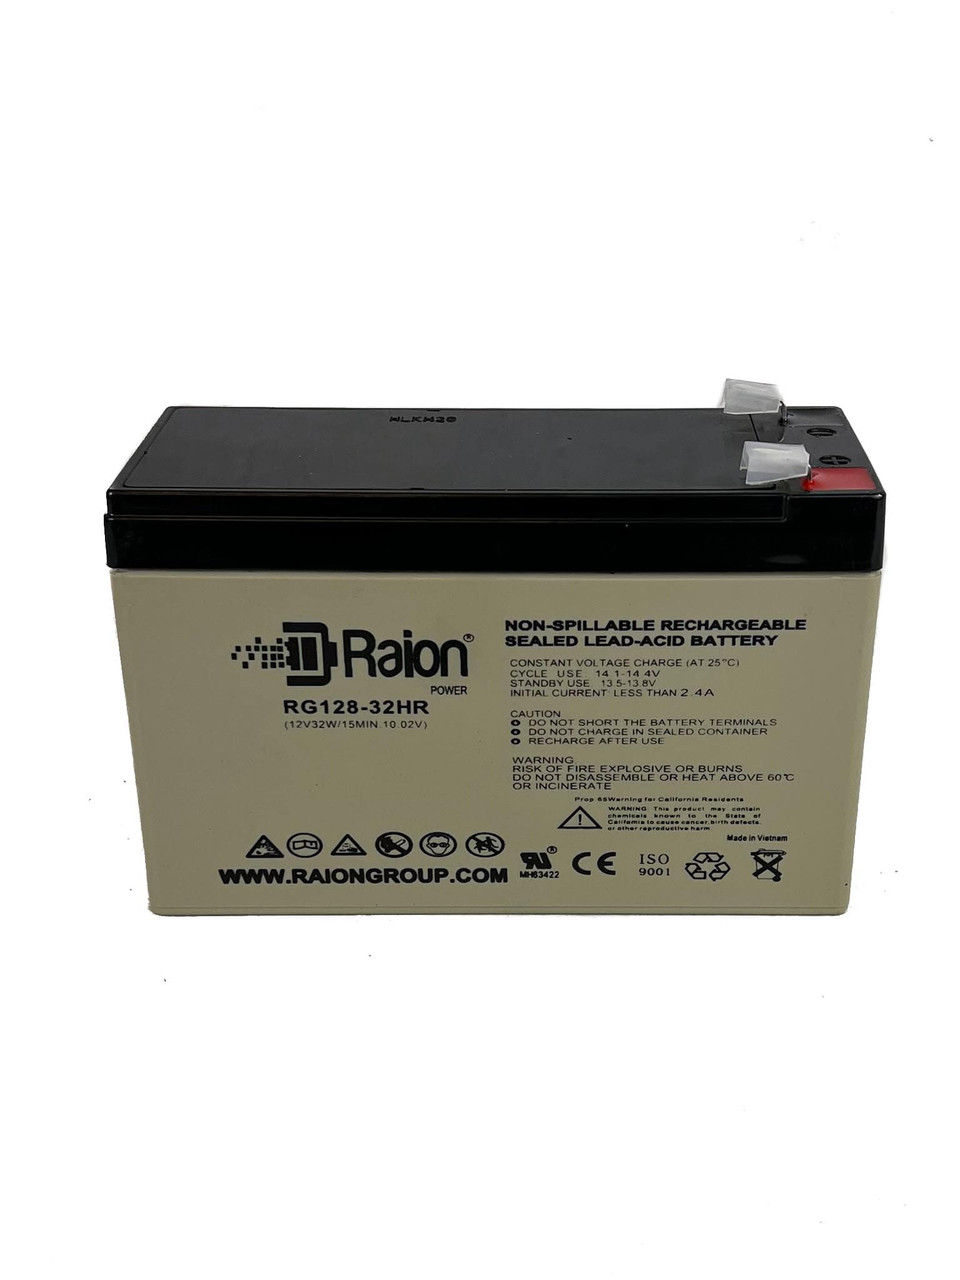 Raion Power RG128-32HR Replacement High Rate Battery Cartridge for Tripp Lite Internet Office 700